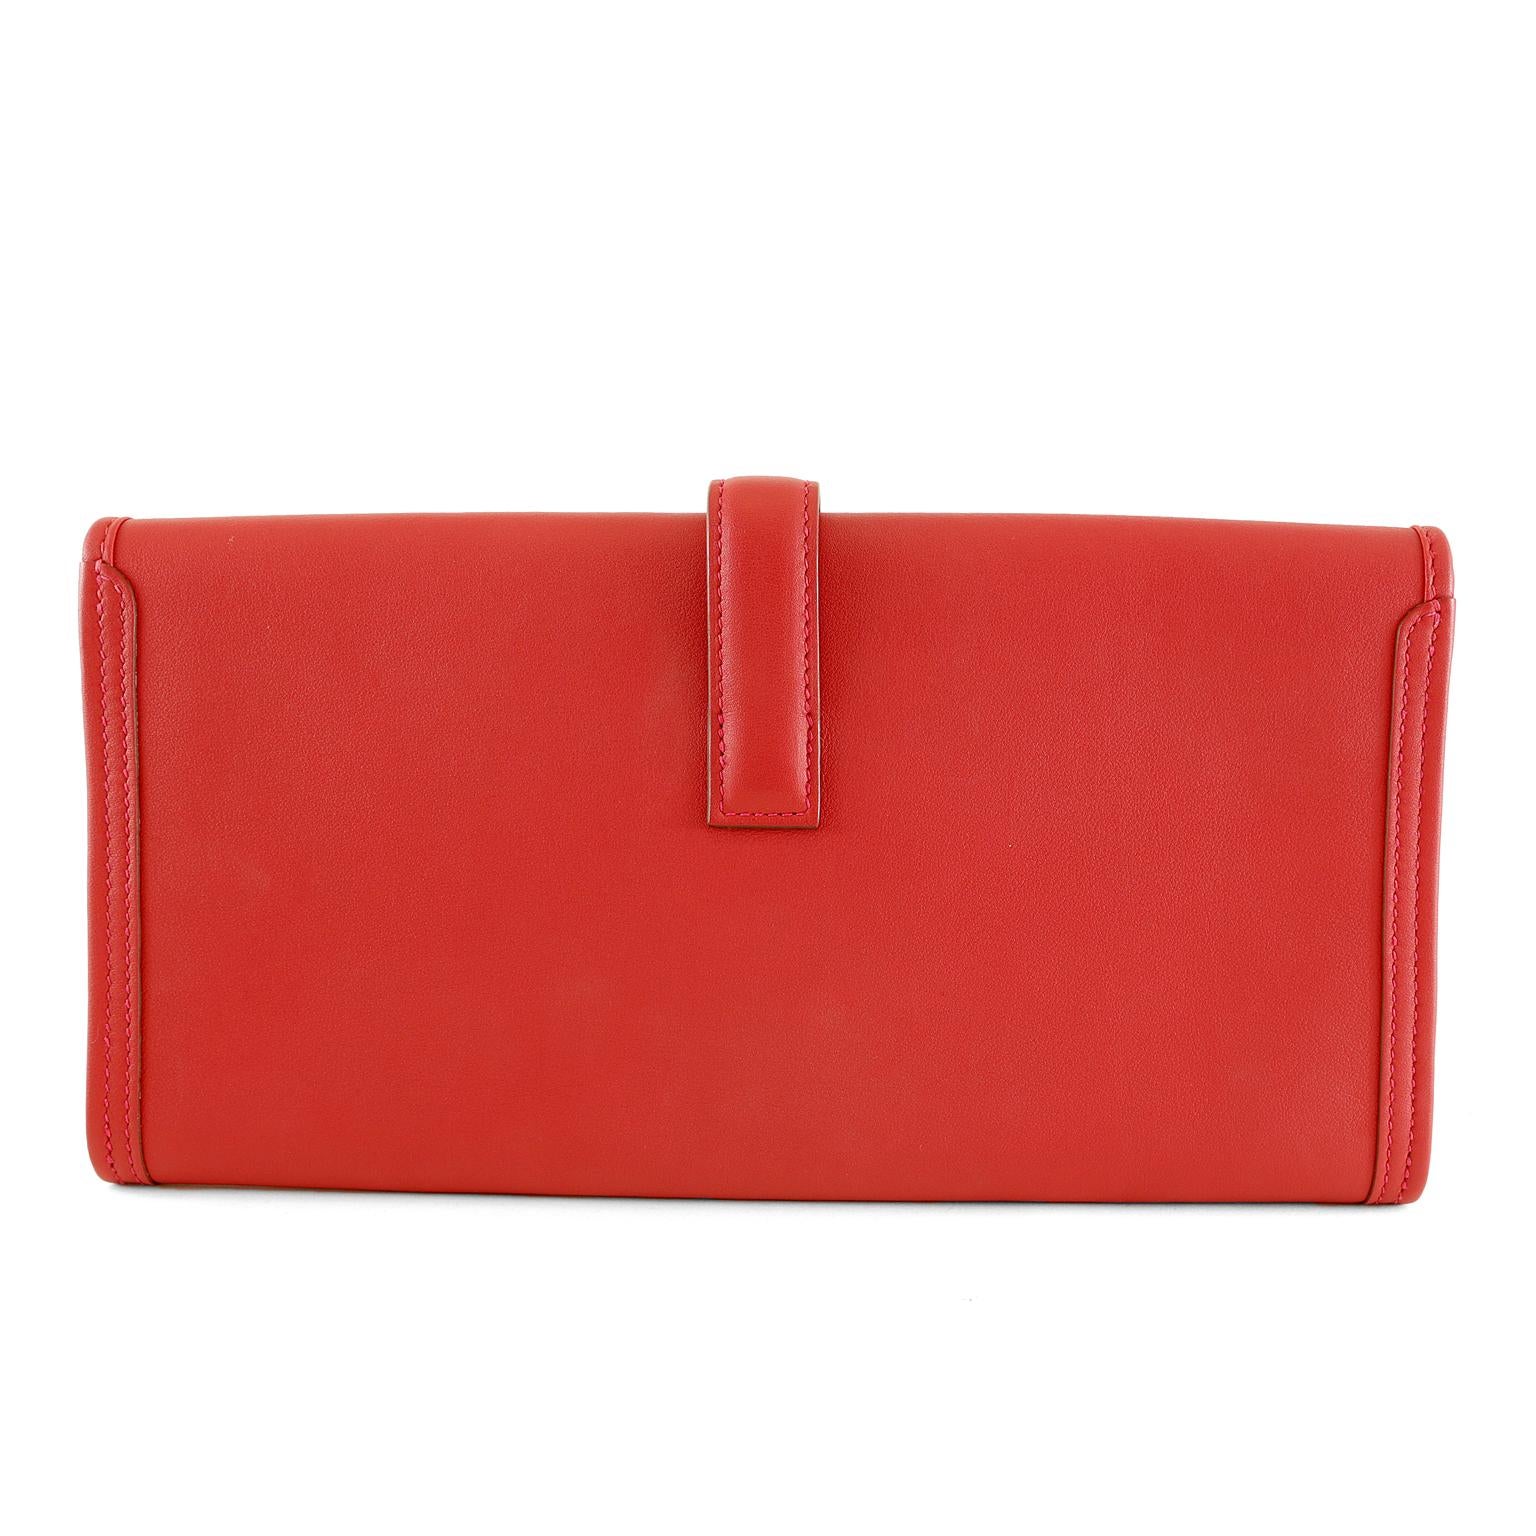 Hermès Red Swift Jige Elan 29- NEW; Never Carried
The penultimate clutch for any occasion, it is a must have for any sophisticated wardrobe.  
Lipstick red smooth Swift calfskin slim clutch has an H belted closure.  Red leather interior.  C stamp.  